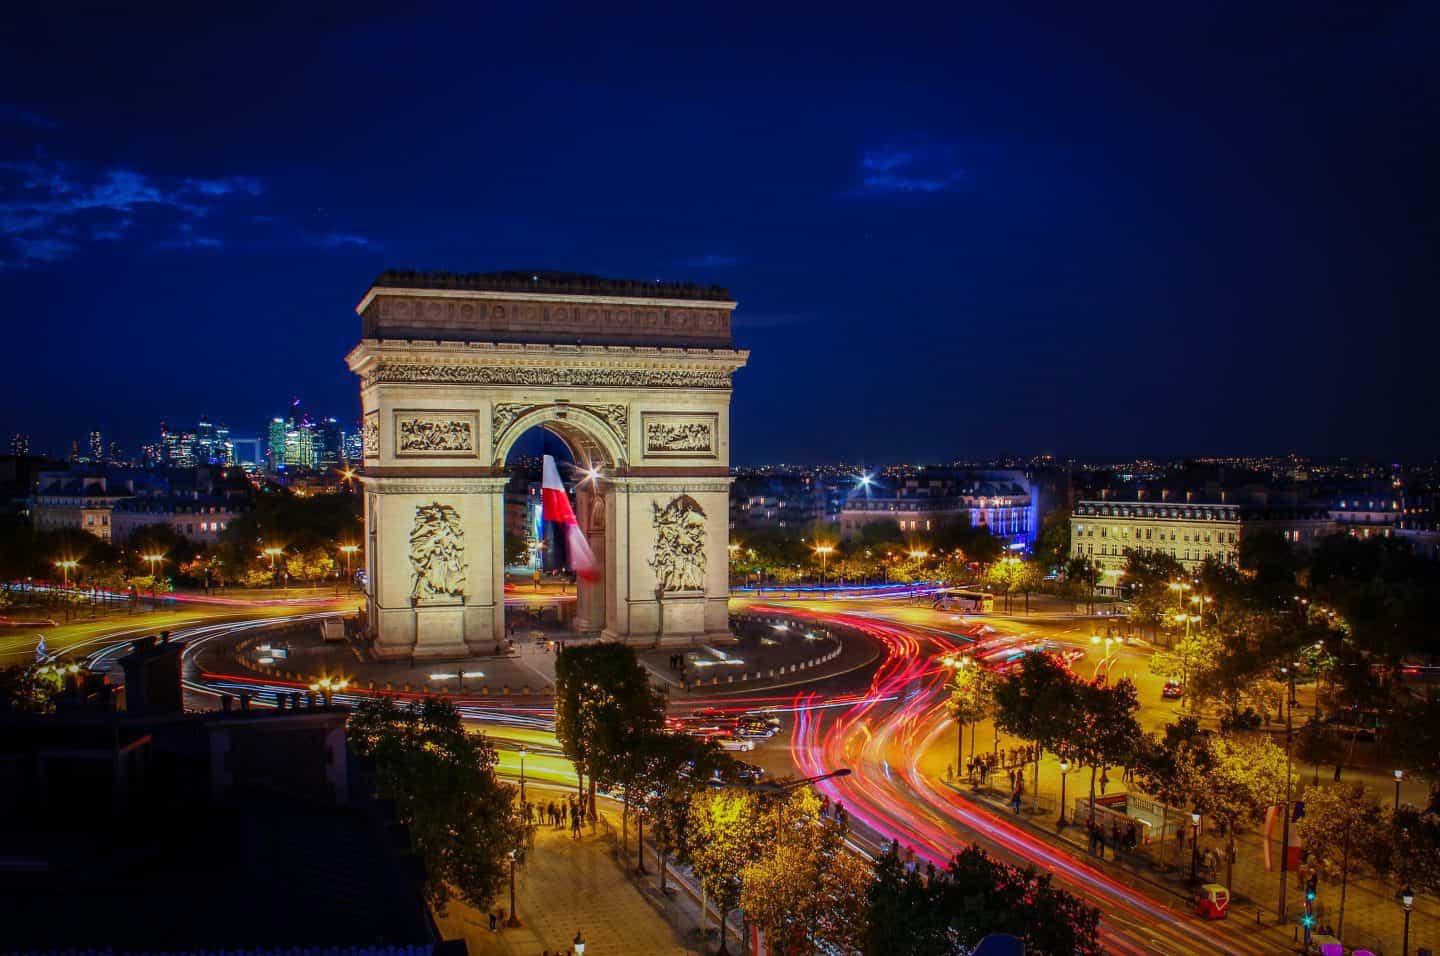 A large clock tower towering over Arc de Triomphe at night